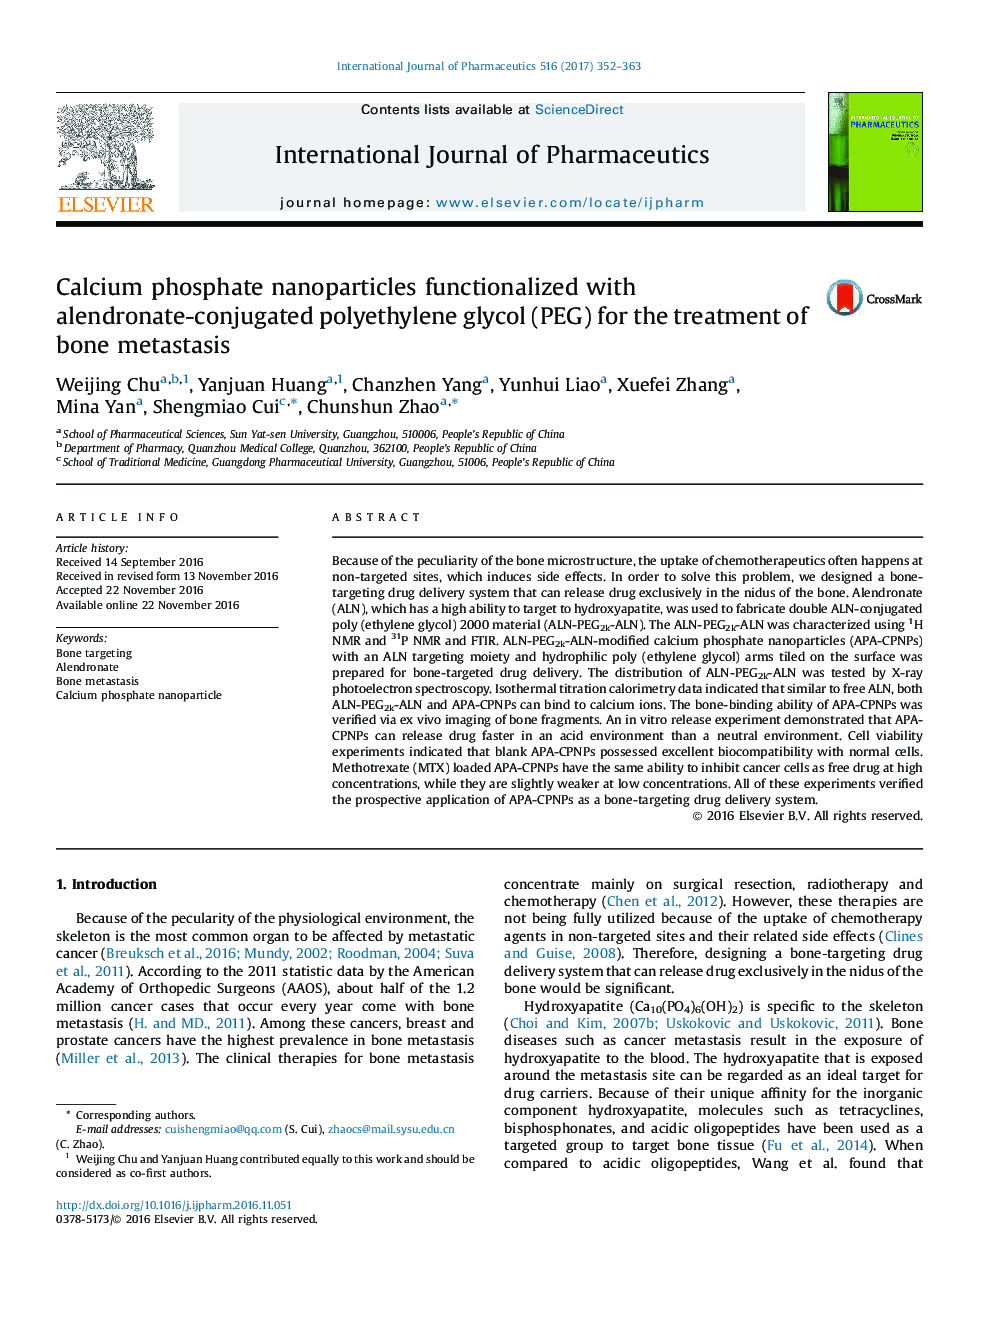 Calcium phosphate nanoparticles functionalized with alendronate-conjugated polyethylene glycol (PEG) for the treatment of bone metastasis